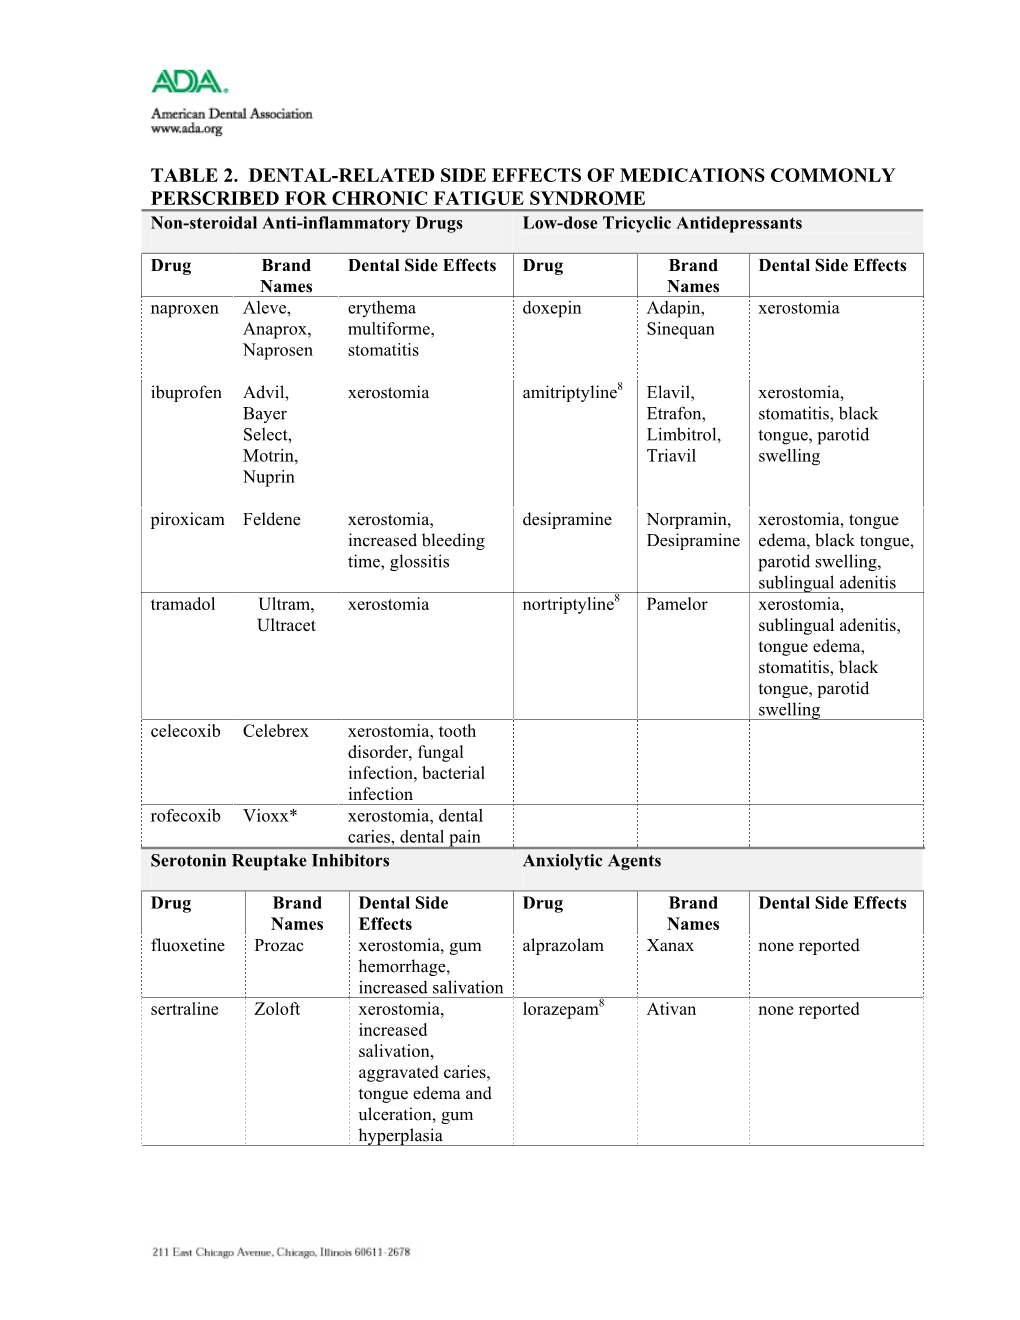 Table 2. Dental-Related Side Effects of Medications